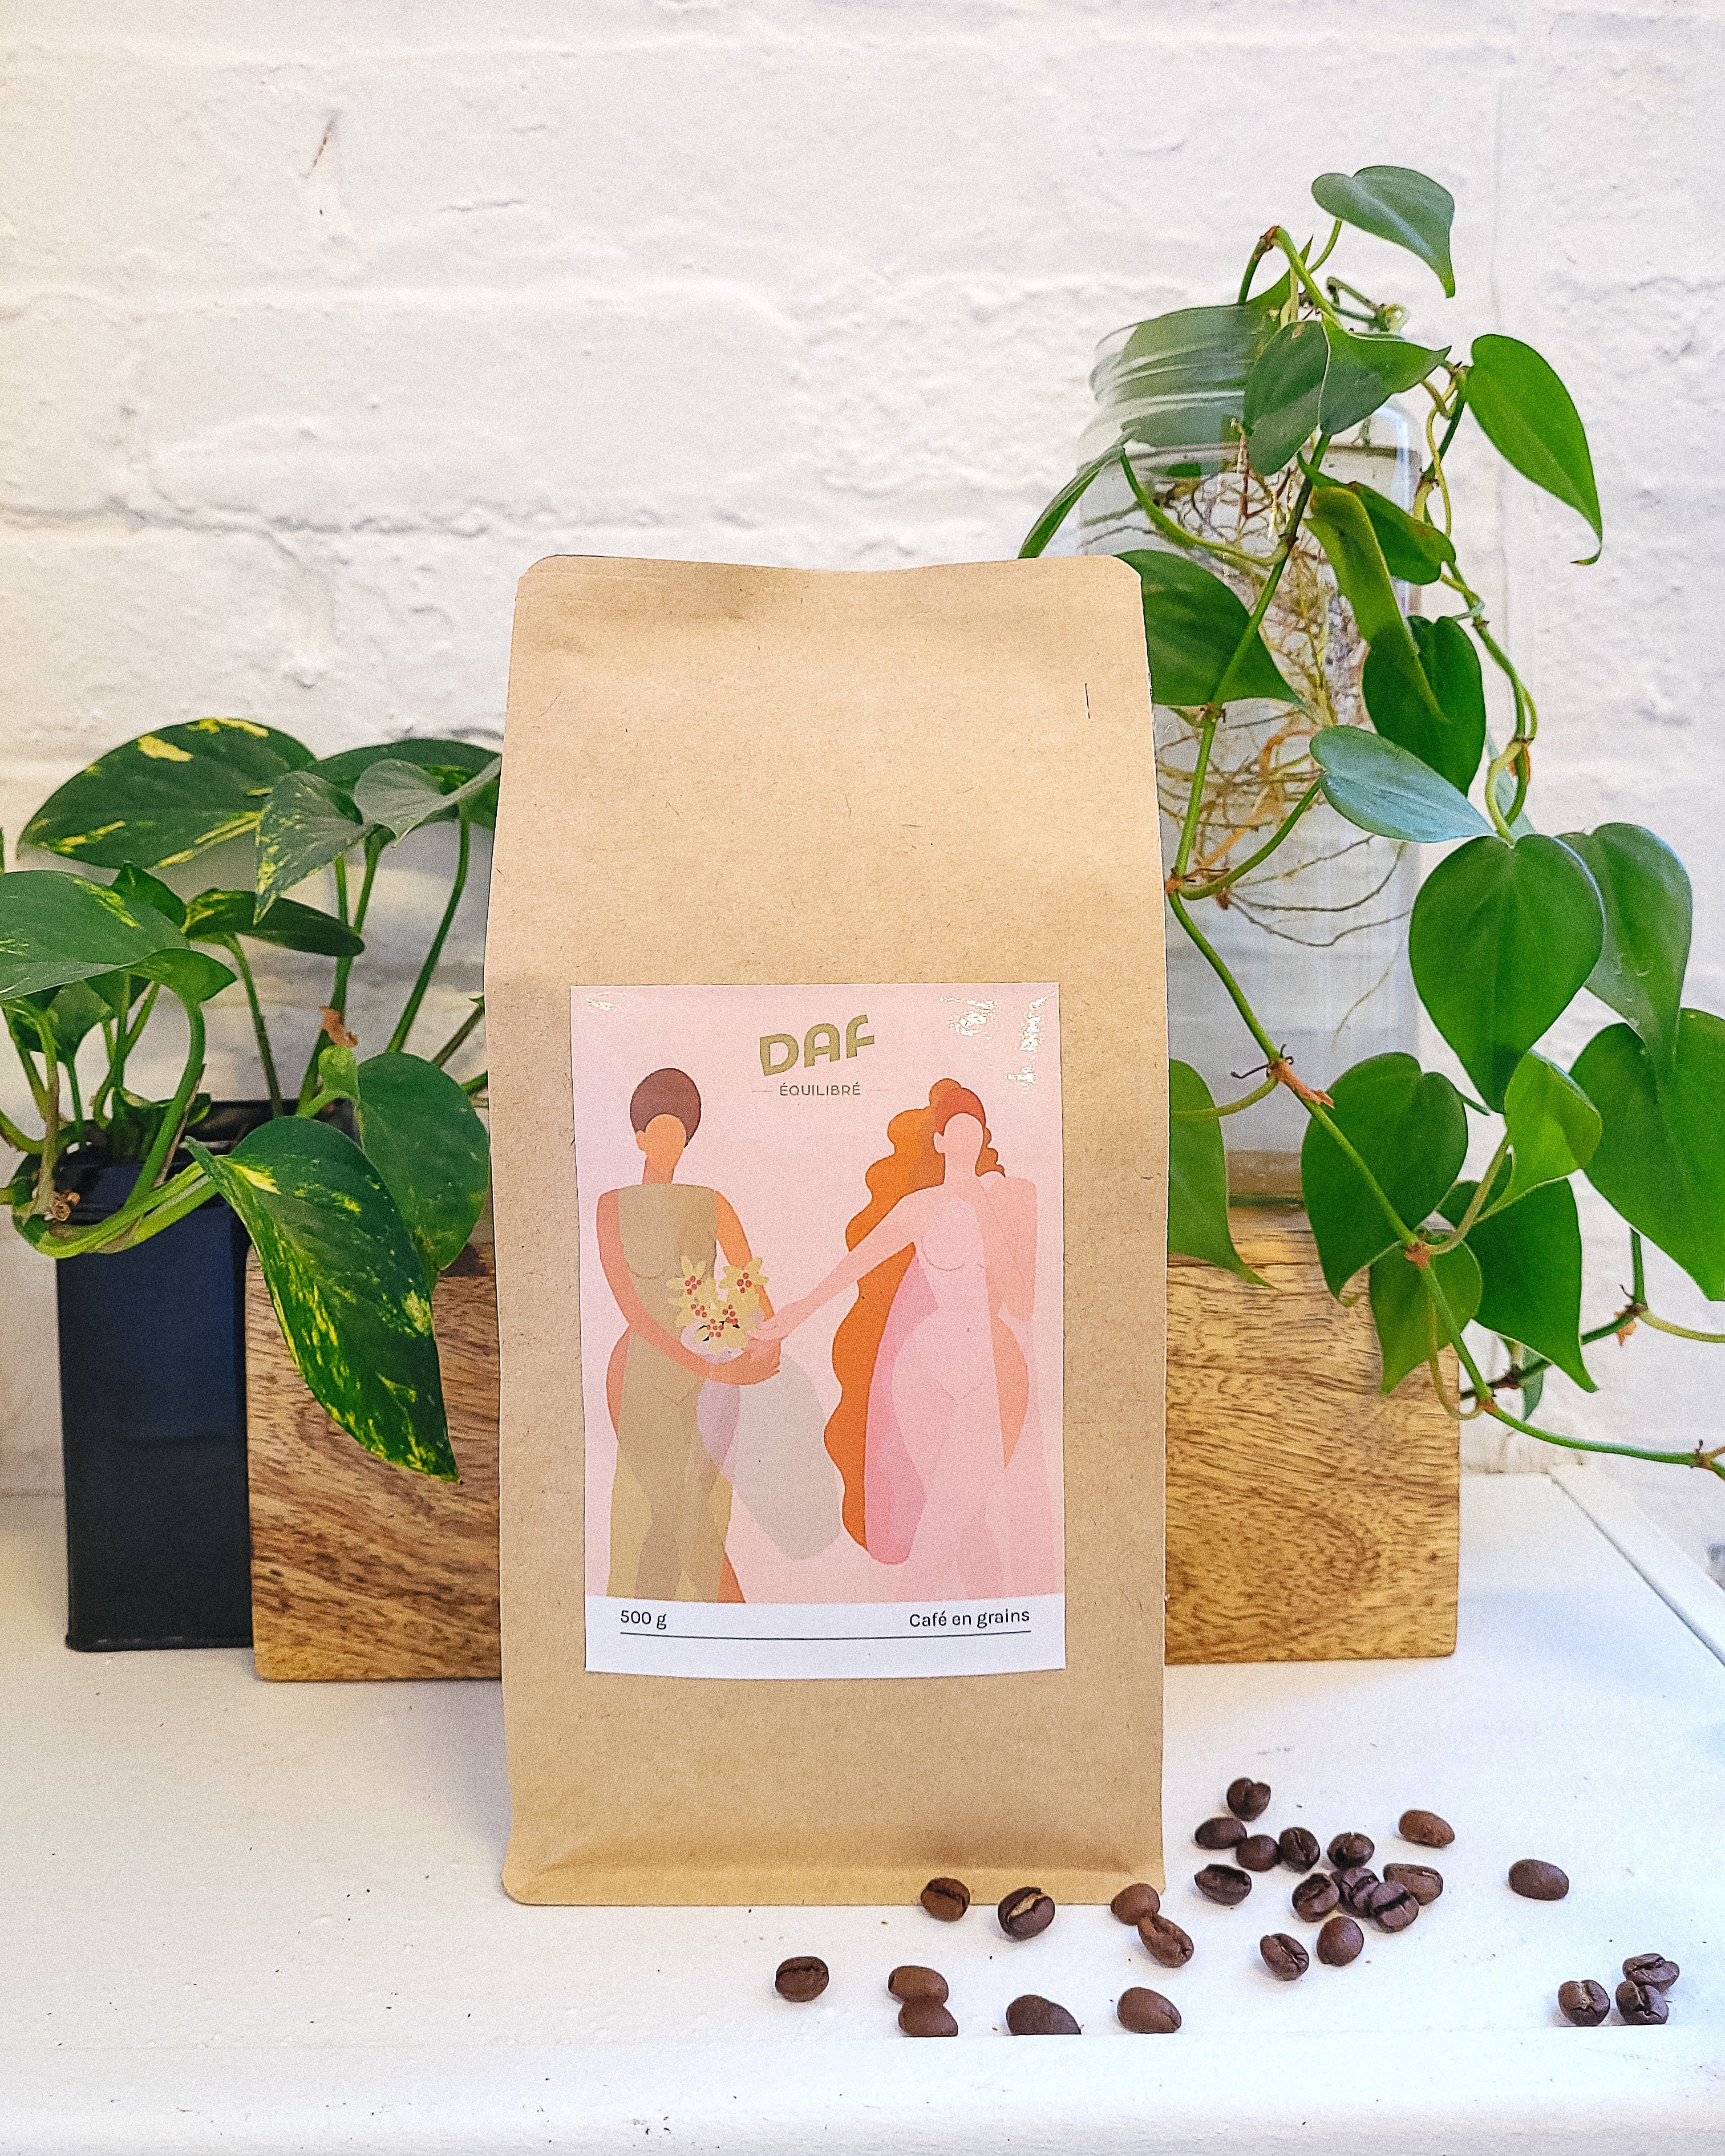 Tasting pack Fruity/Balanced/Strong - 3 bags x 500g - Local coffee beans- DAF